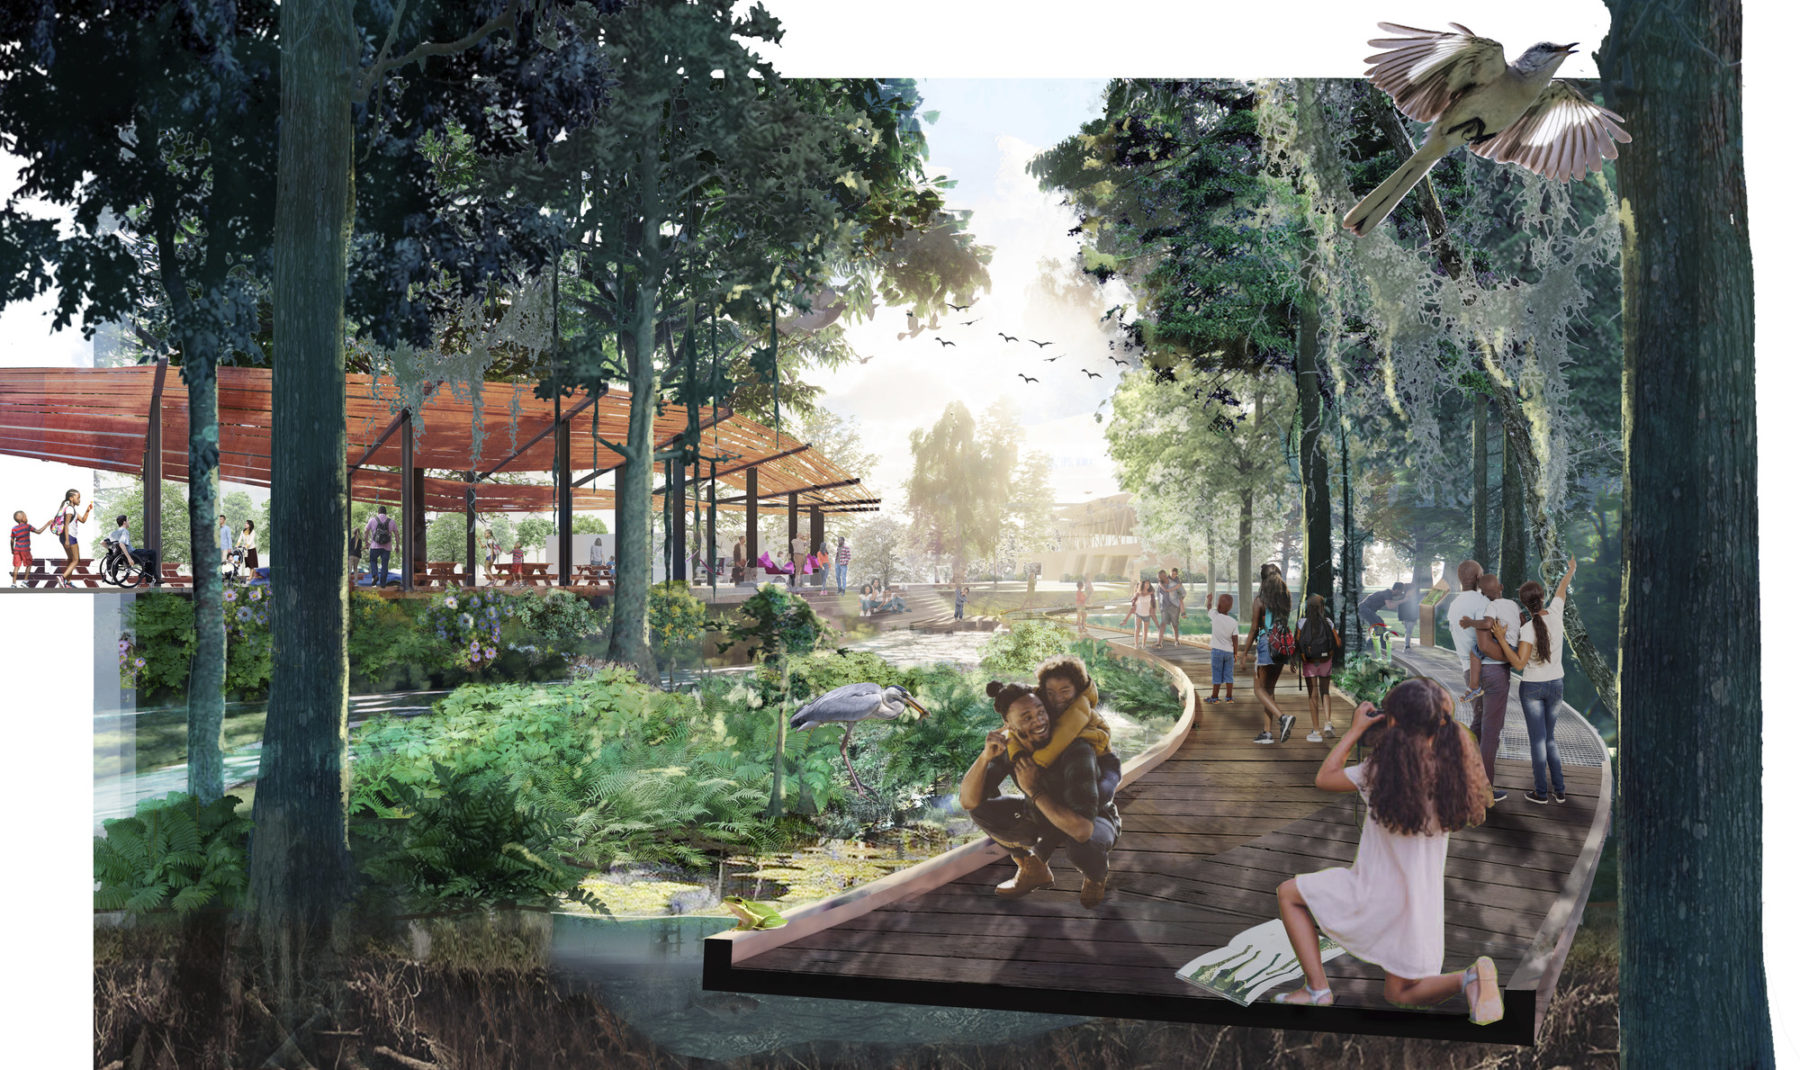 Rendering of the Bayou promenade. Families pose for pictures with wildlife along the walk.